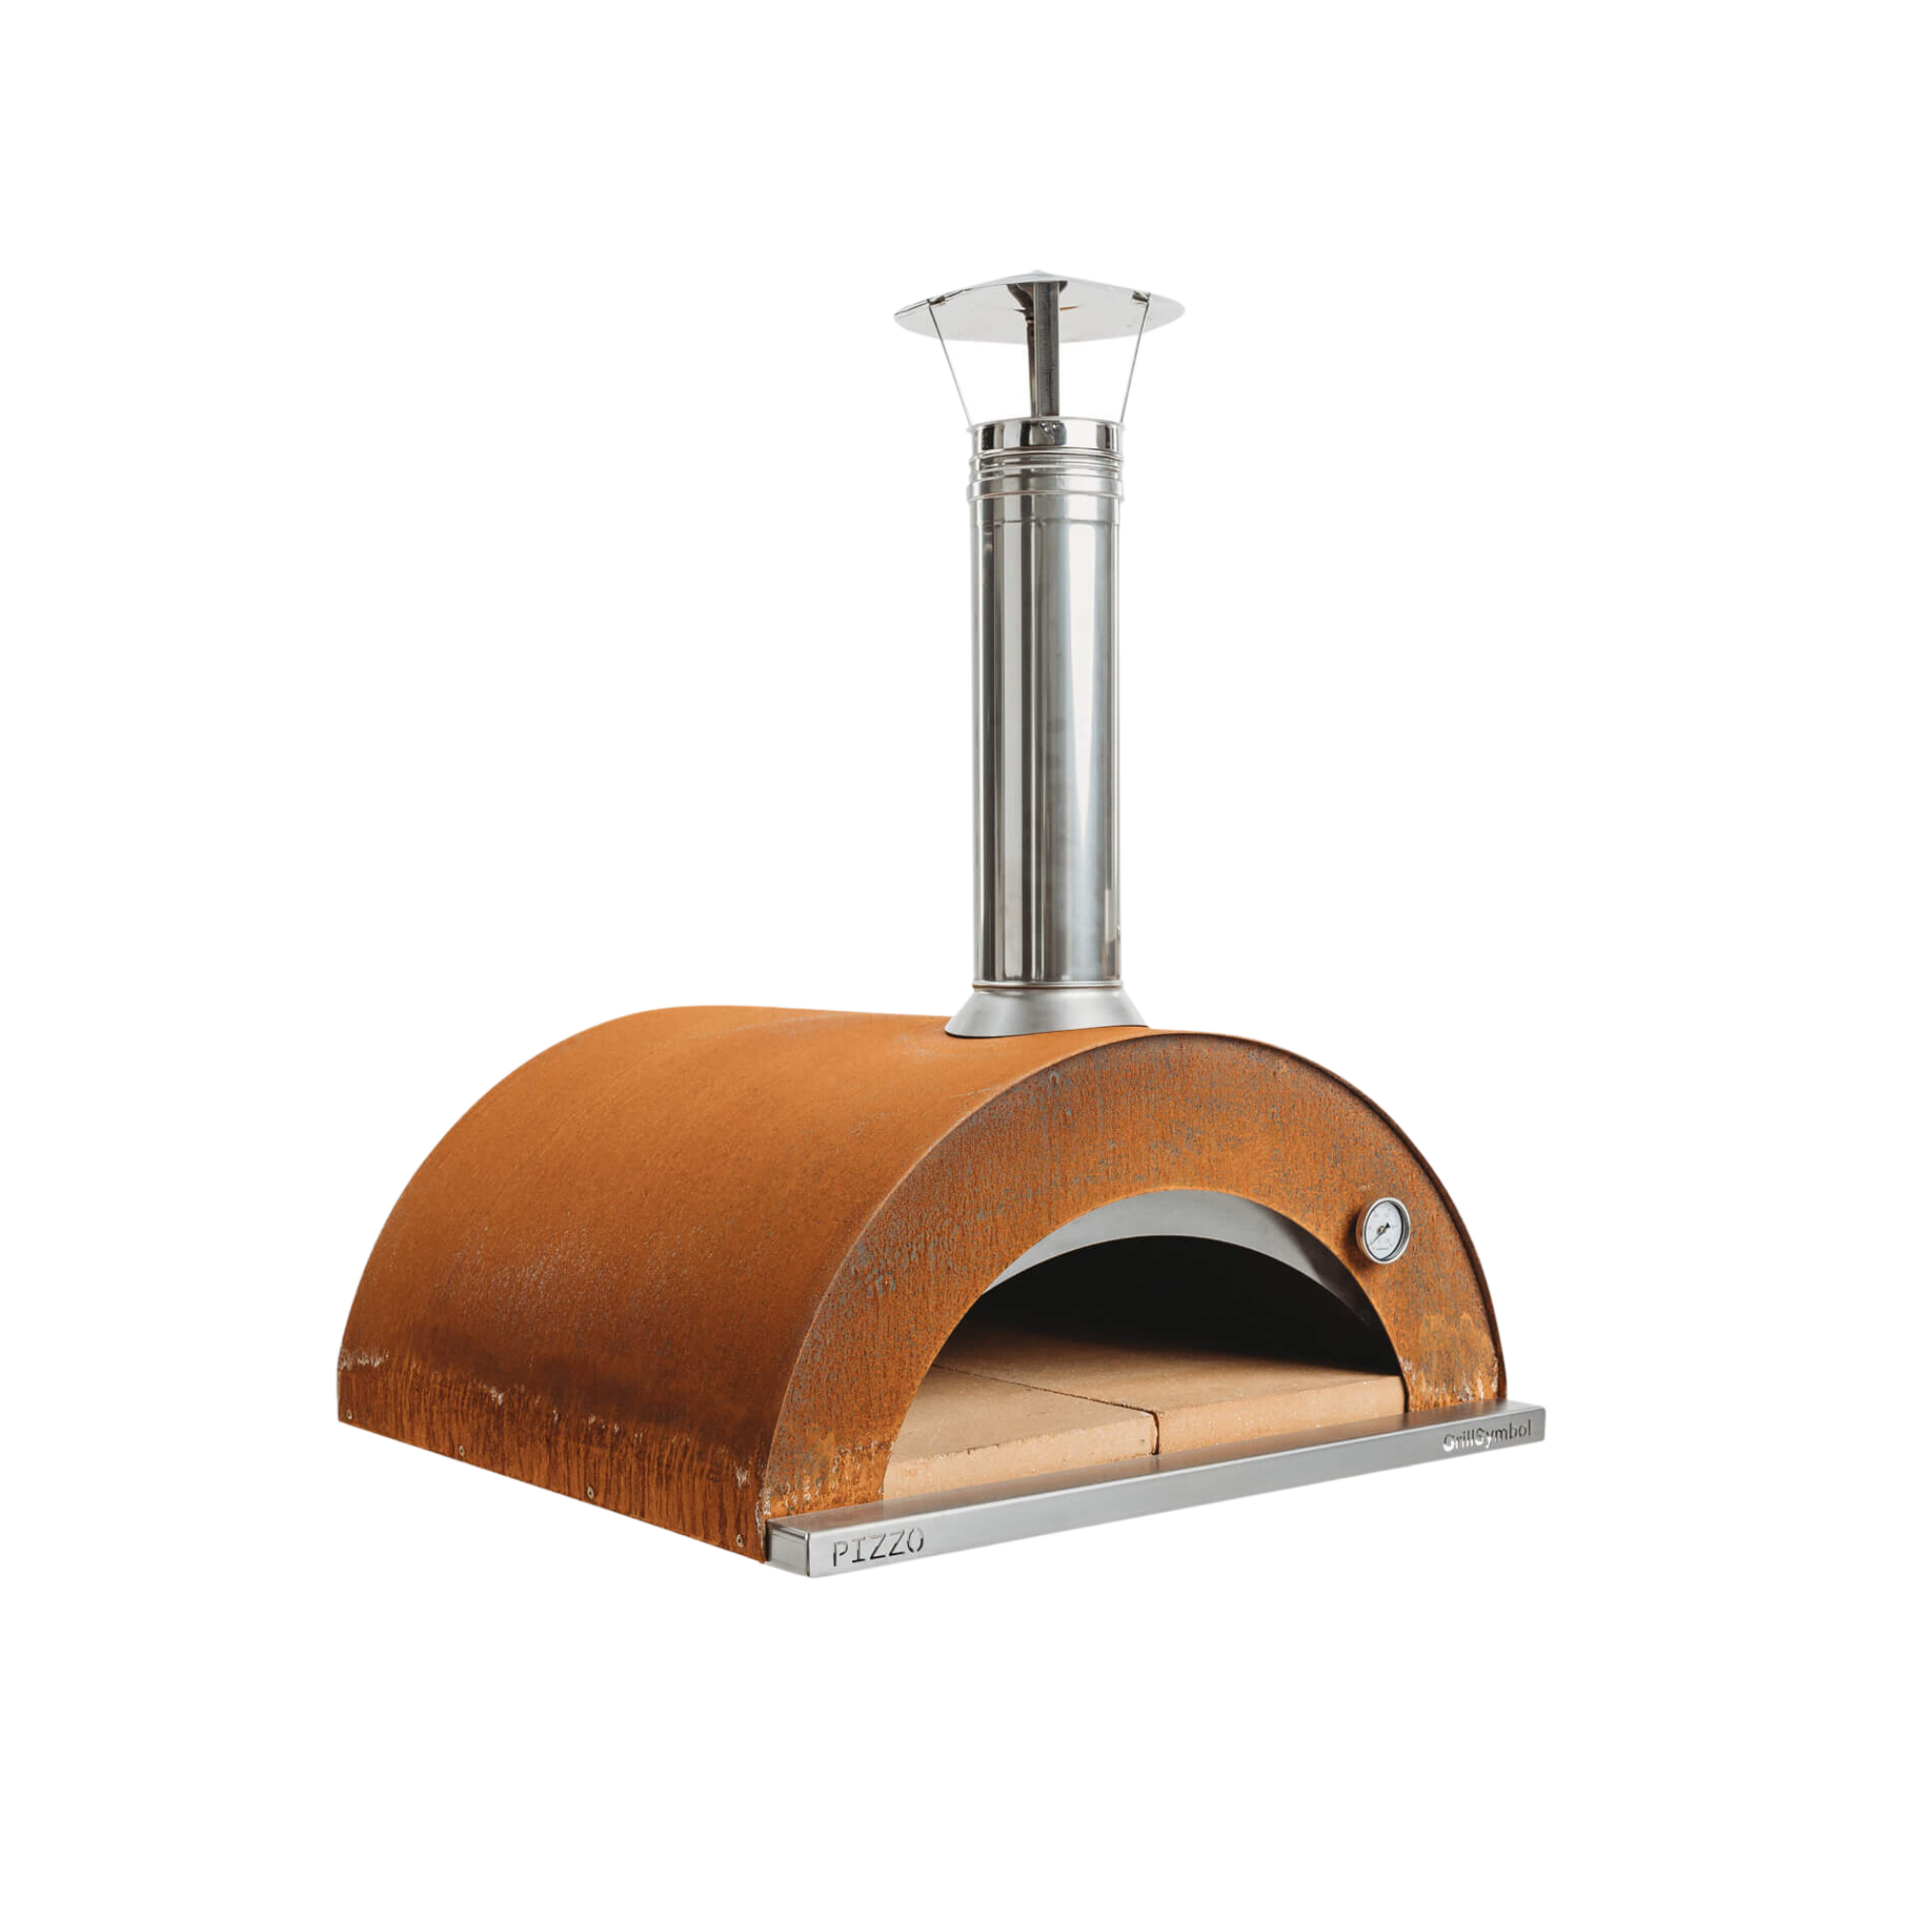 Pizzo Wood Fired Pizza Oven